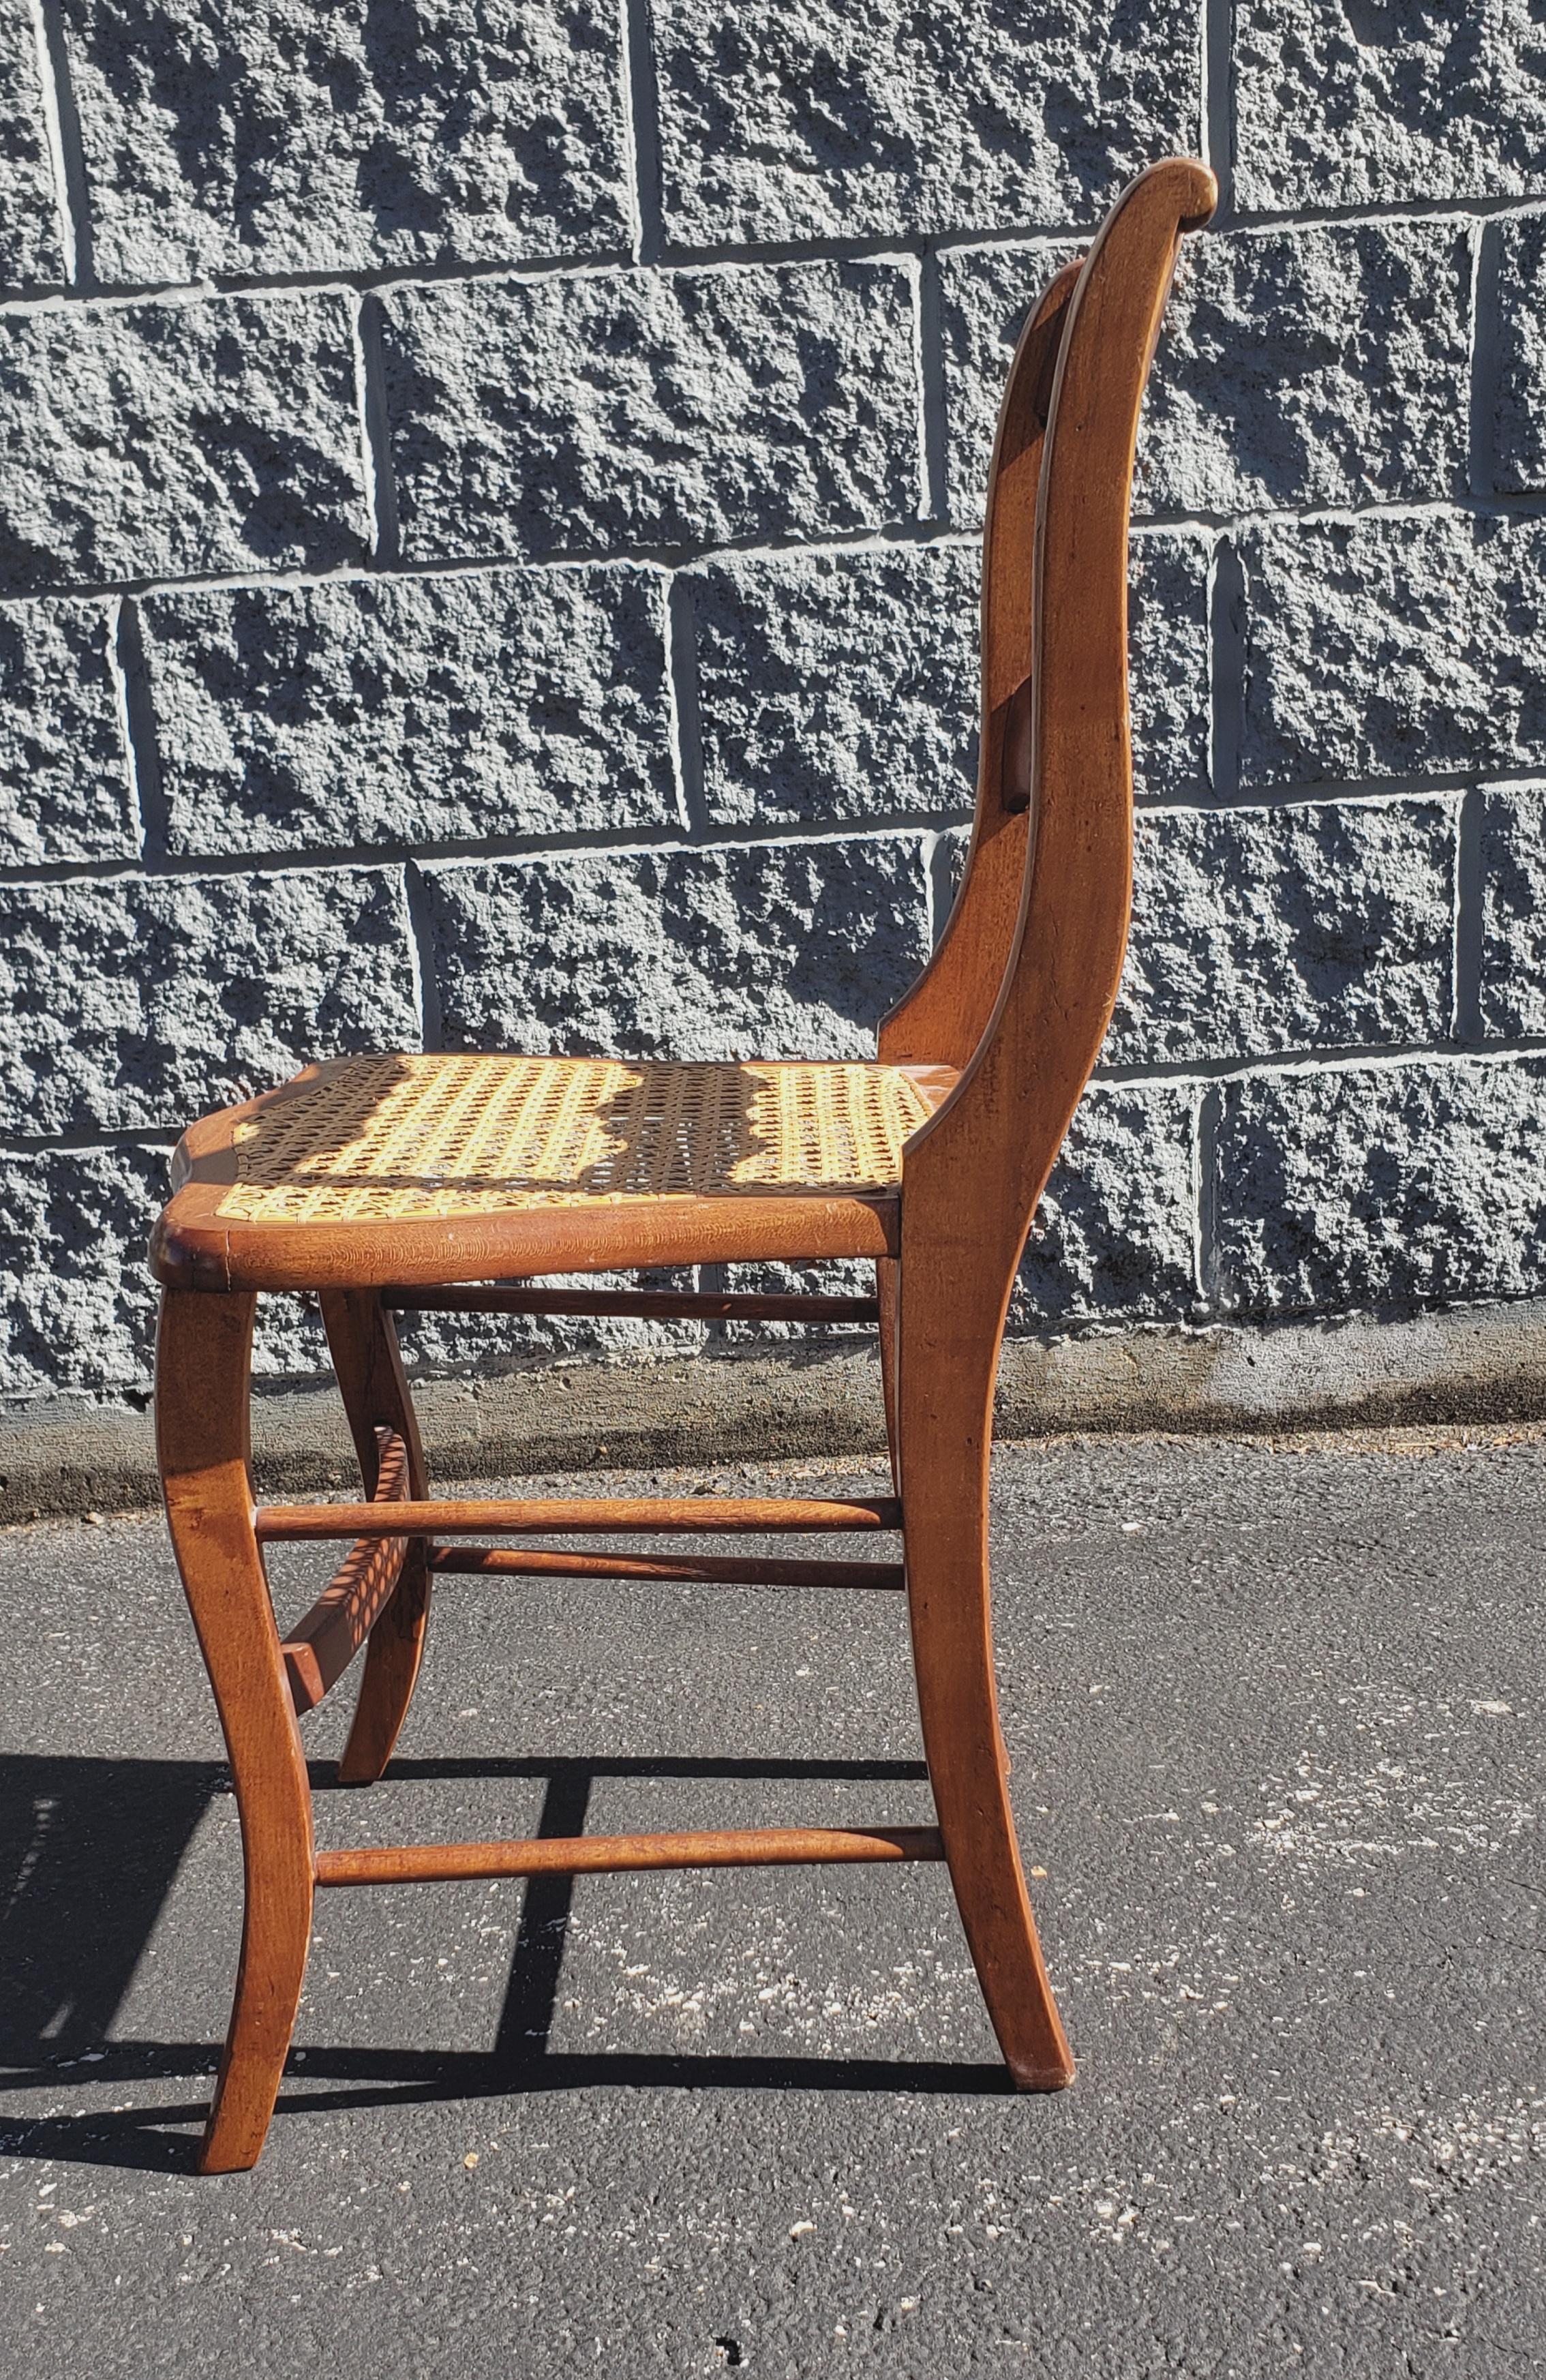 Caning Early American Ladder Back Maple and Cane Seat Chairs, a Pair, circa 1880s For Sale